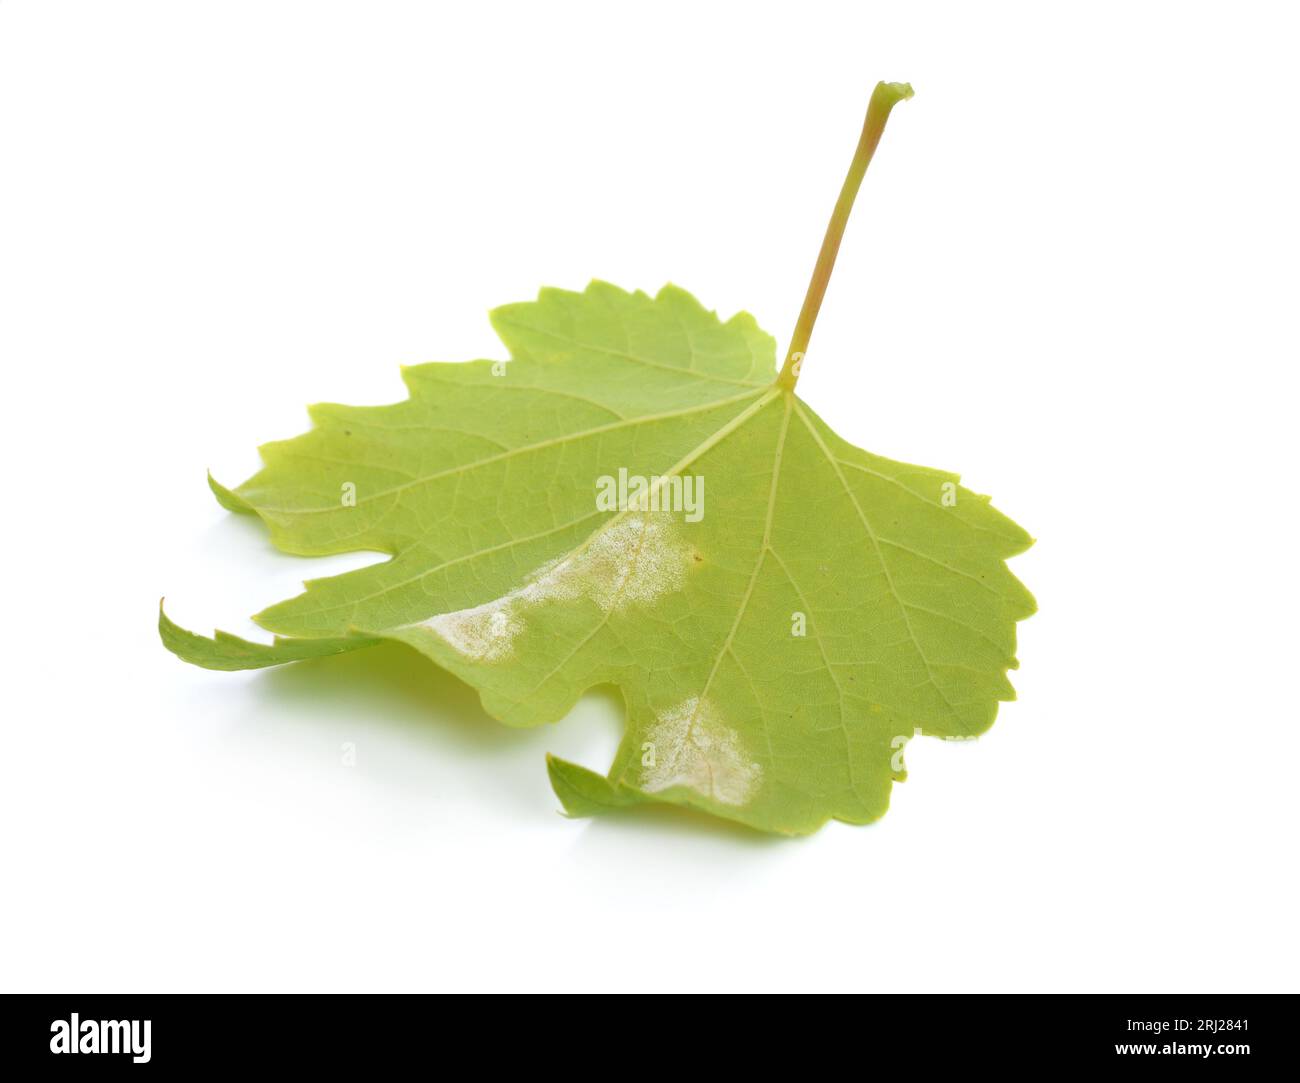 Downy mildew on a grape leaf. Isolated on white background Stock Photo